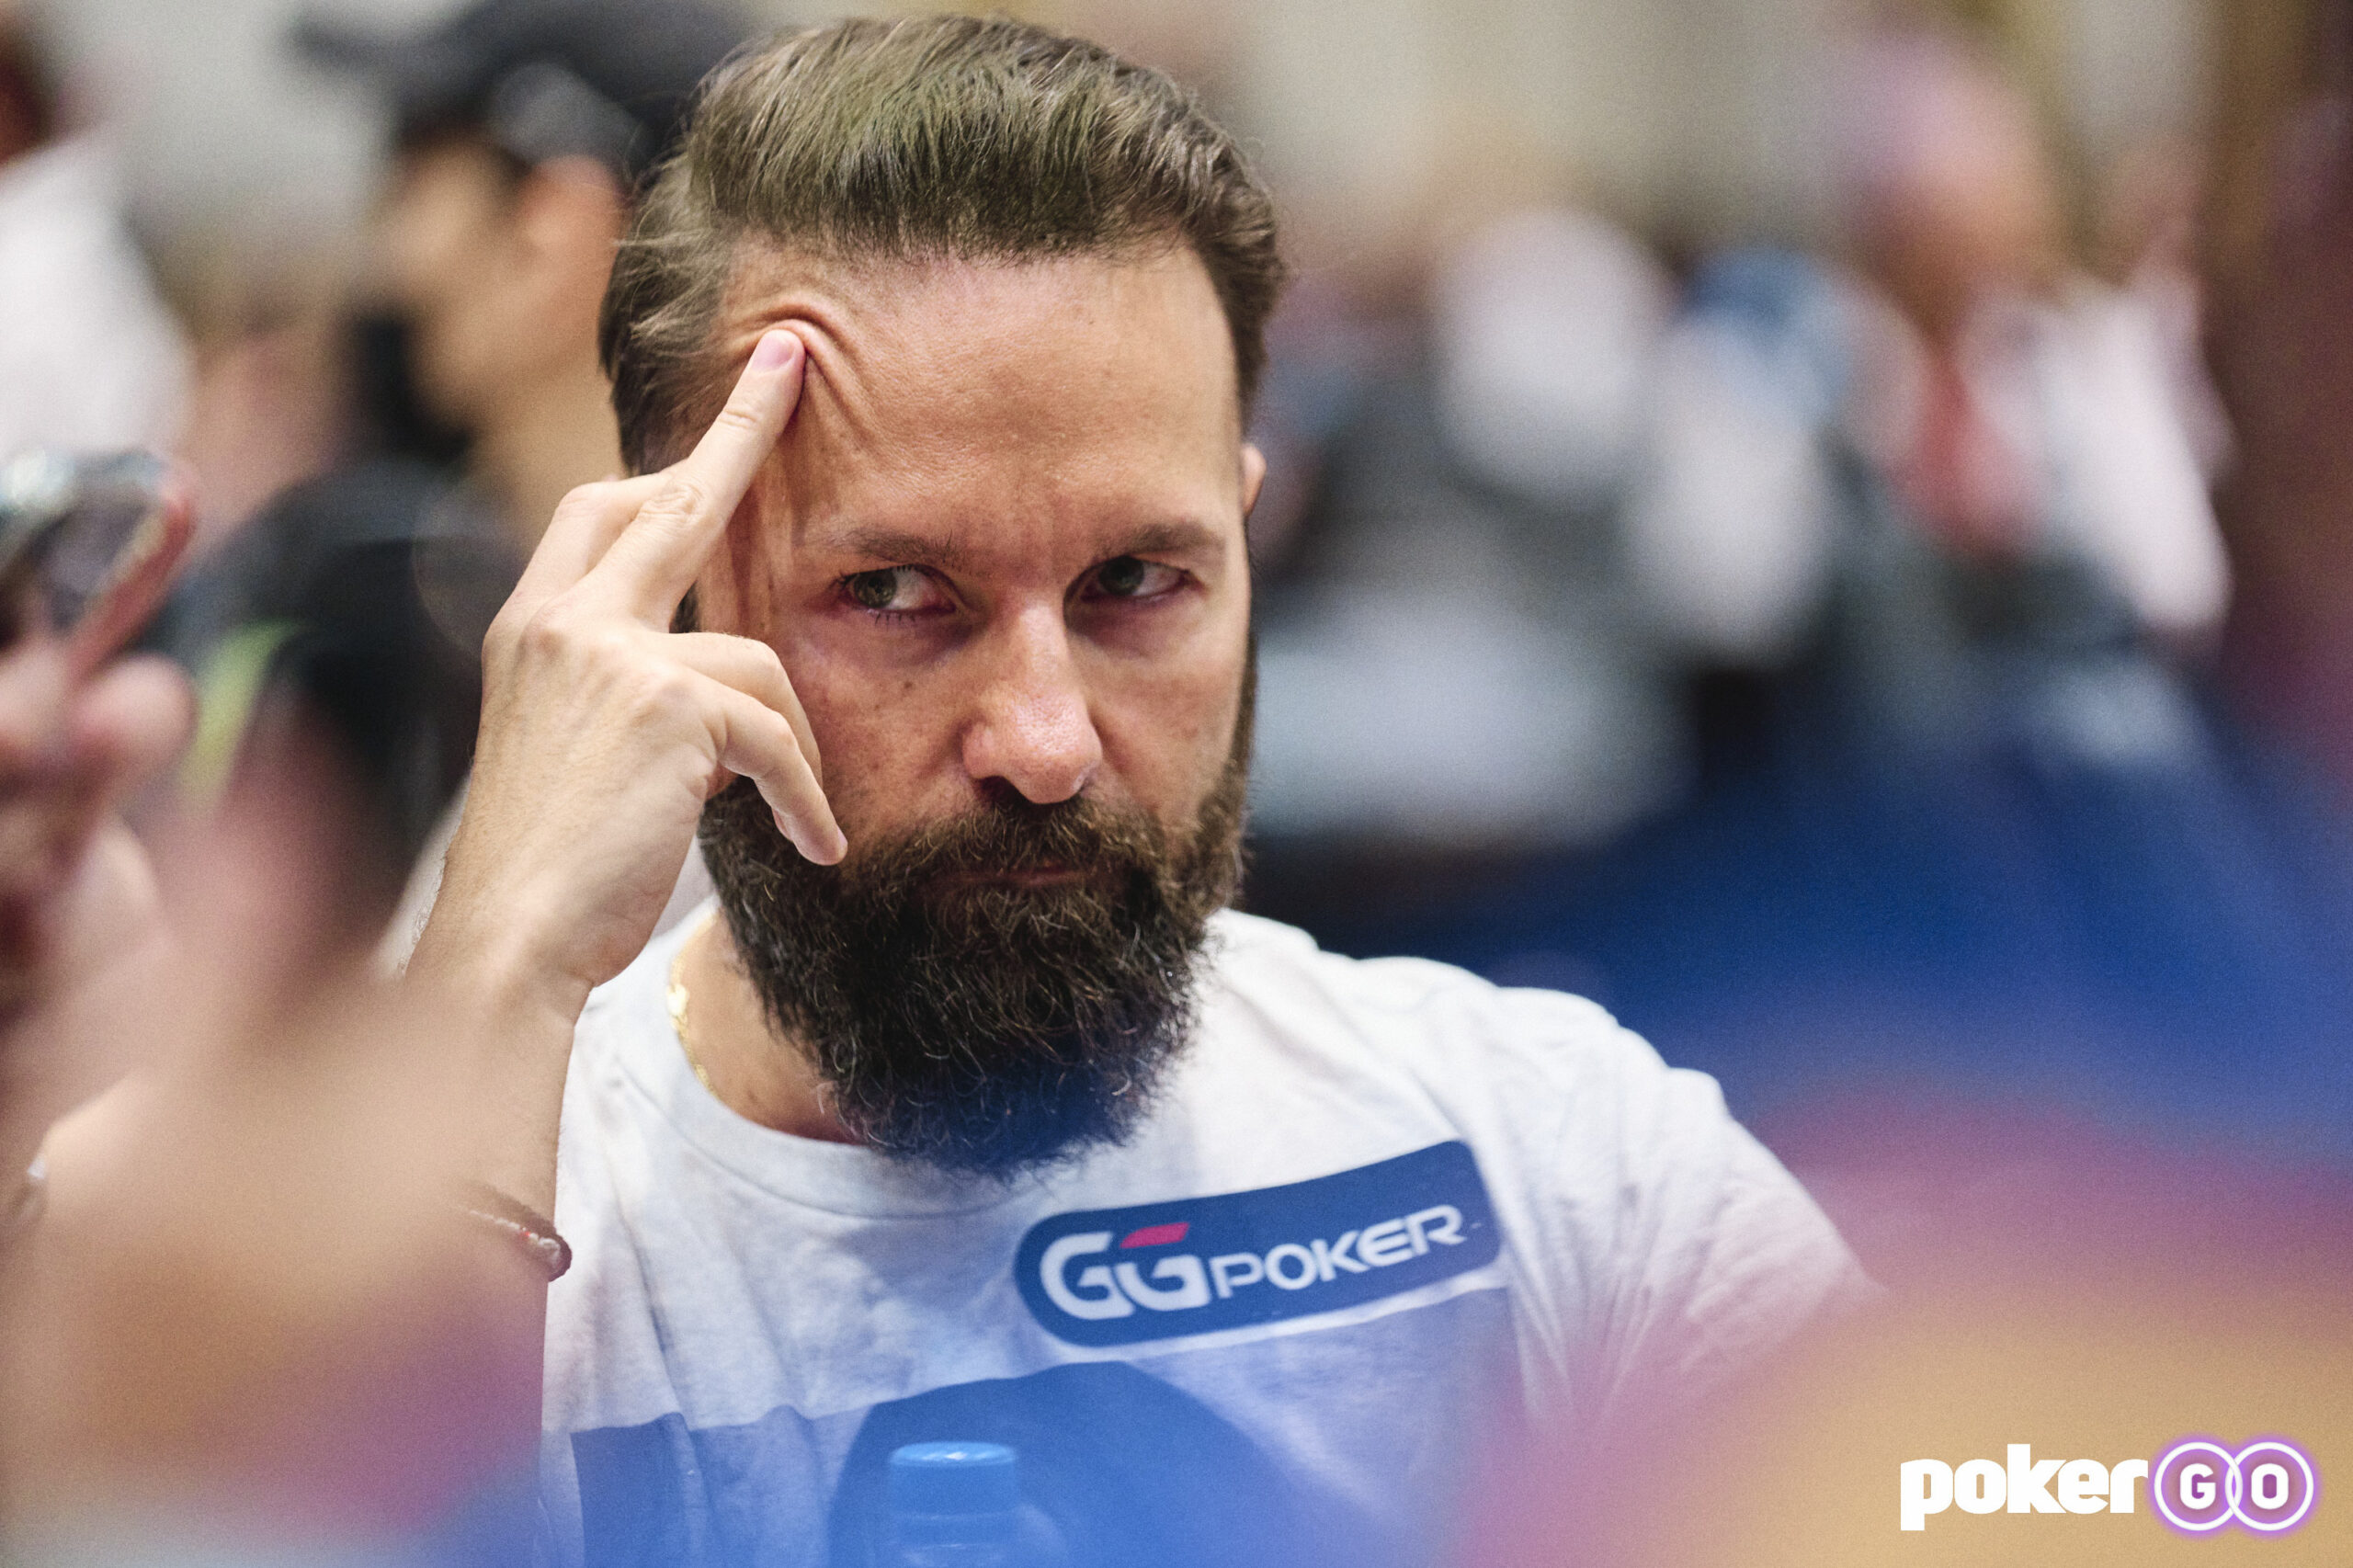 Check out Daniel Negreanu's best results from the 2022 WSOP